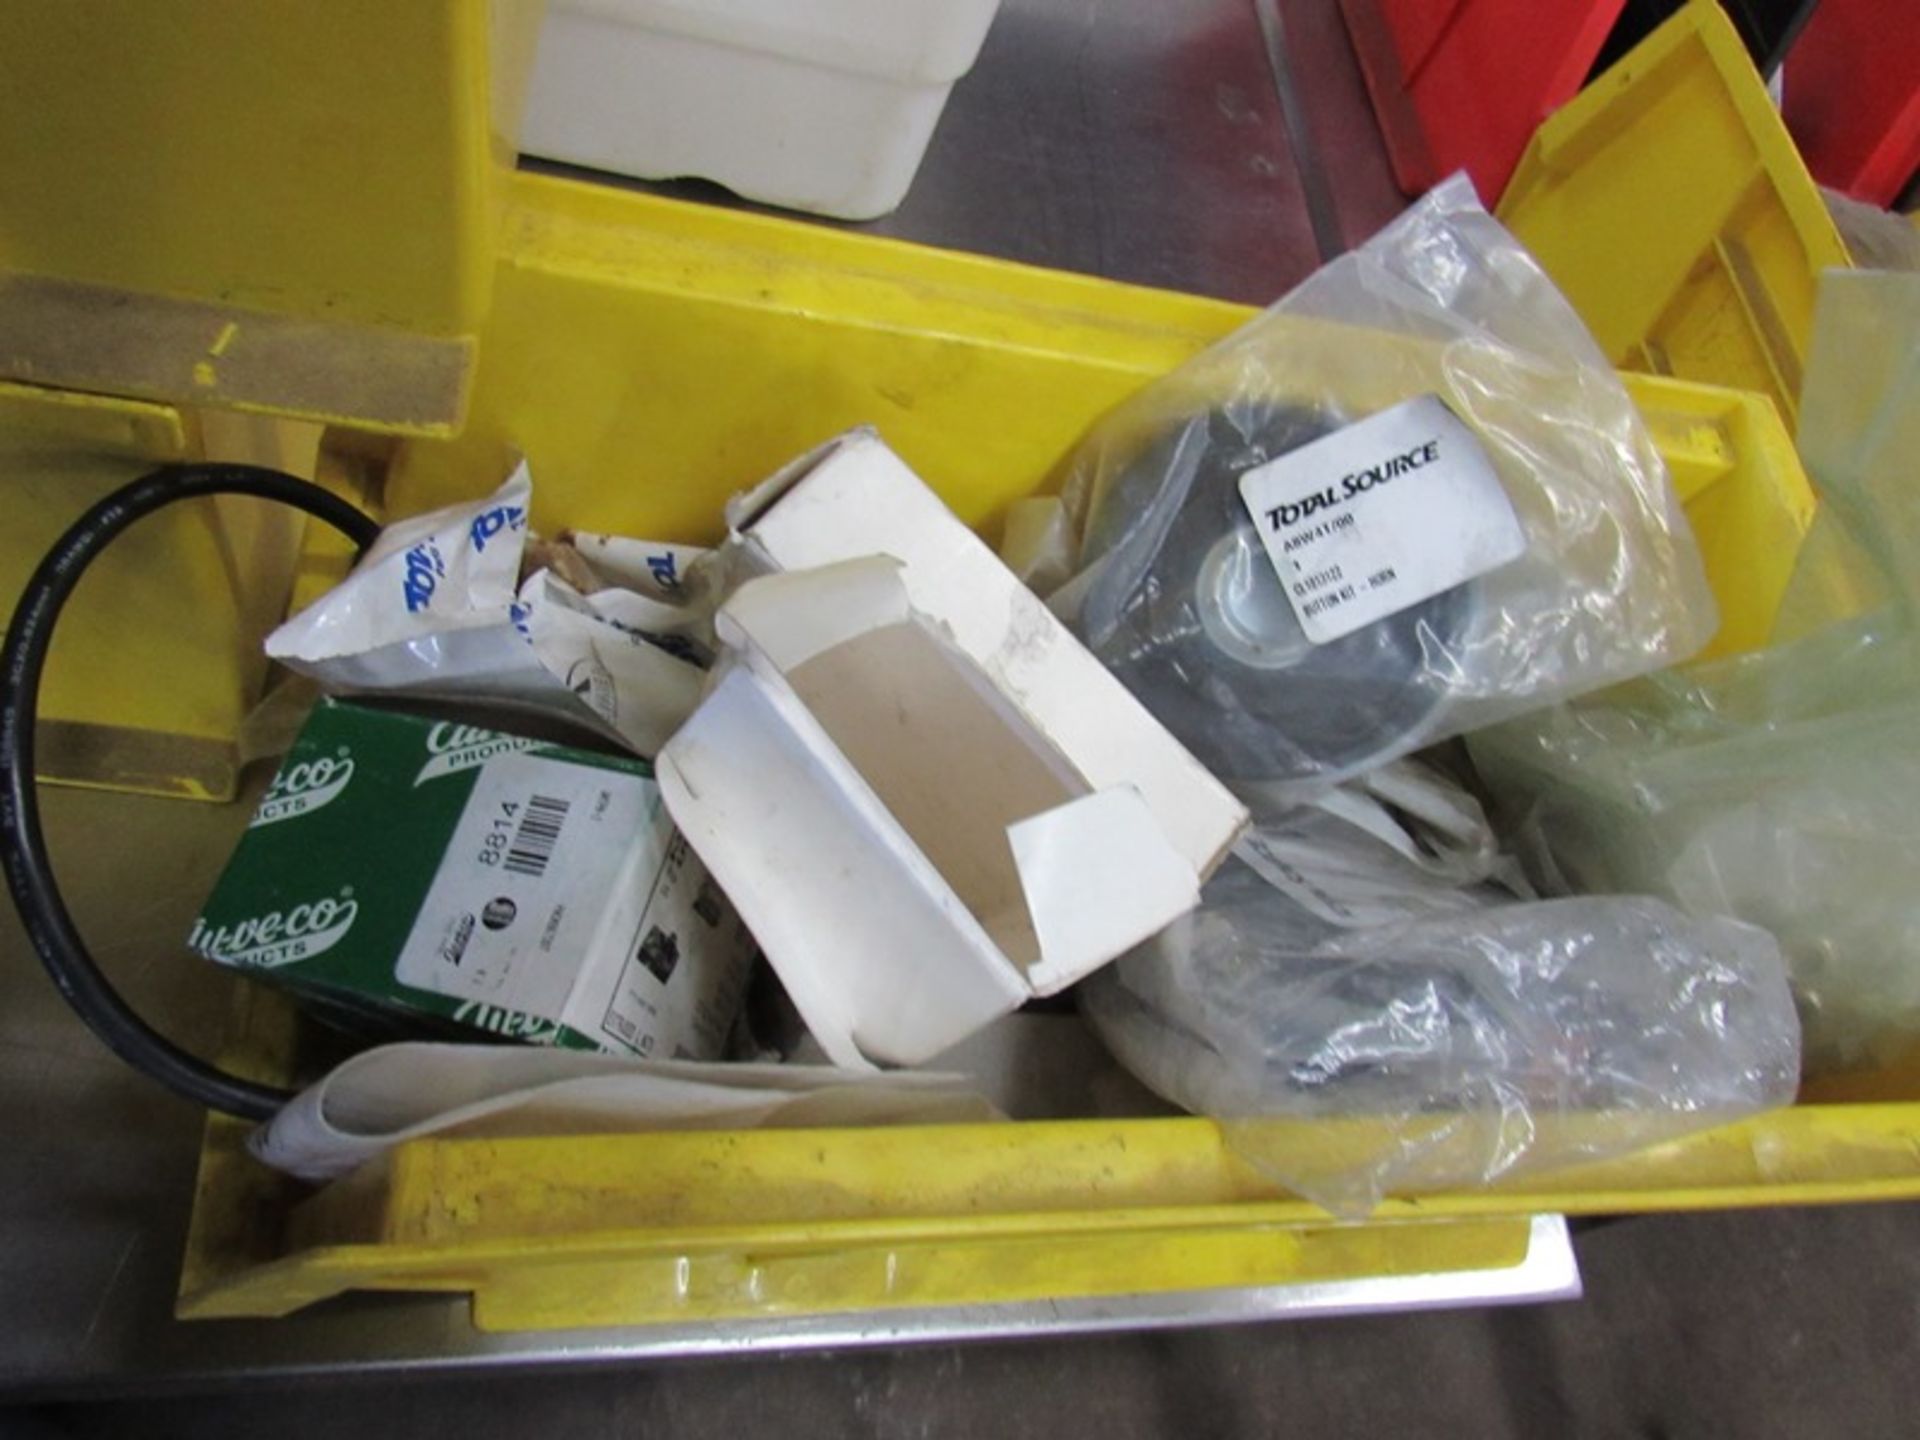 Lot Misc. Hardware Screws , Nails, Nuts, Bolts, Timing Belts, Hardware Compartment Bin;*** All Funds - Image 7 of 8